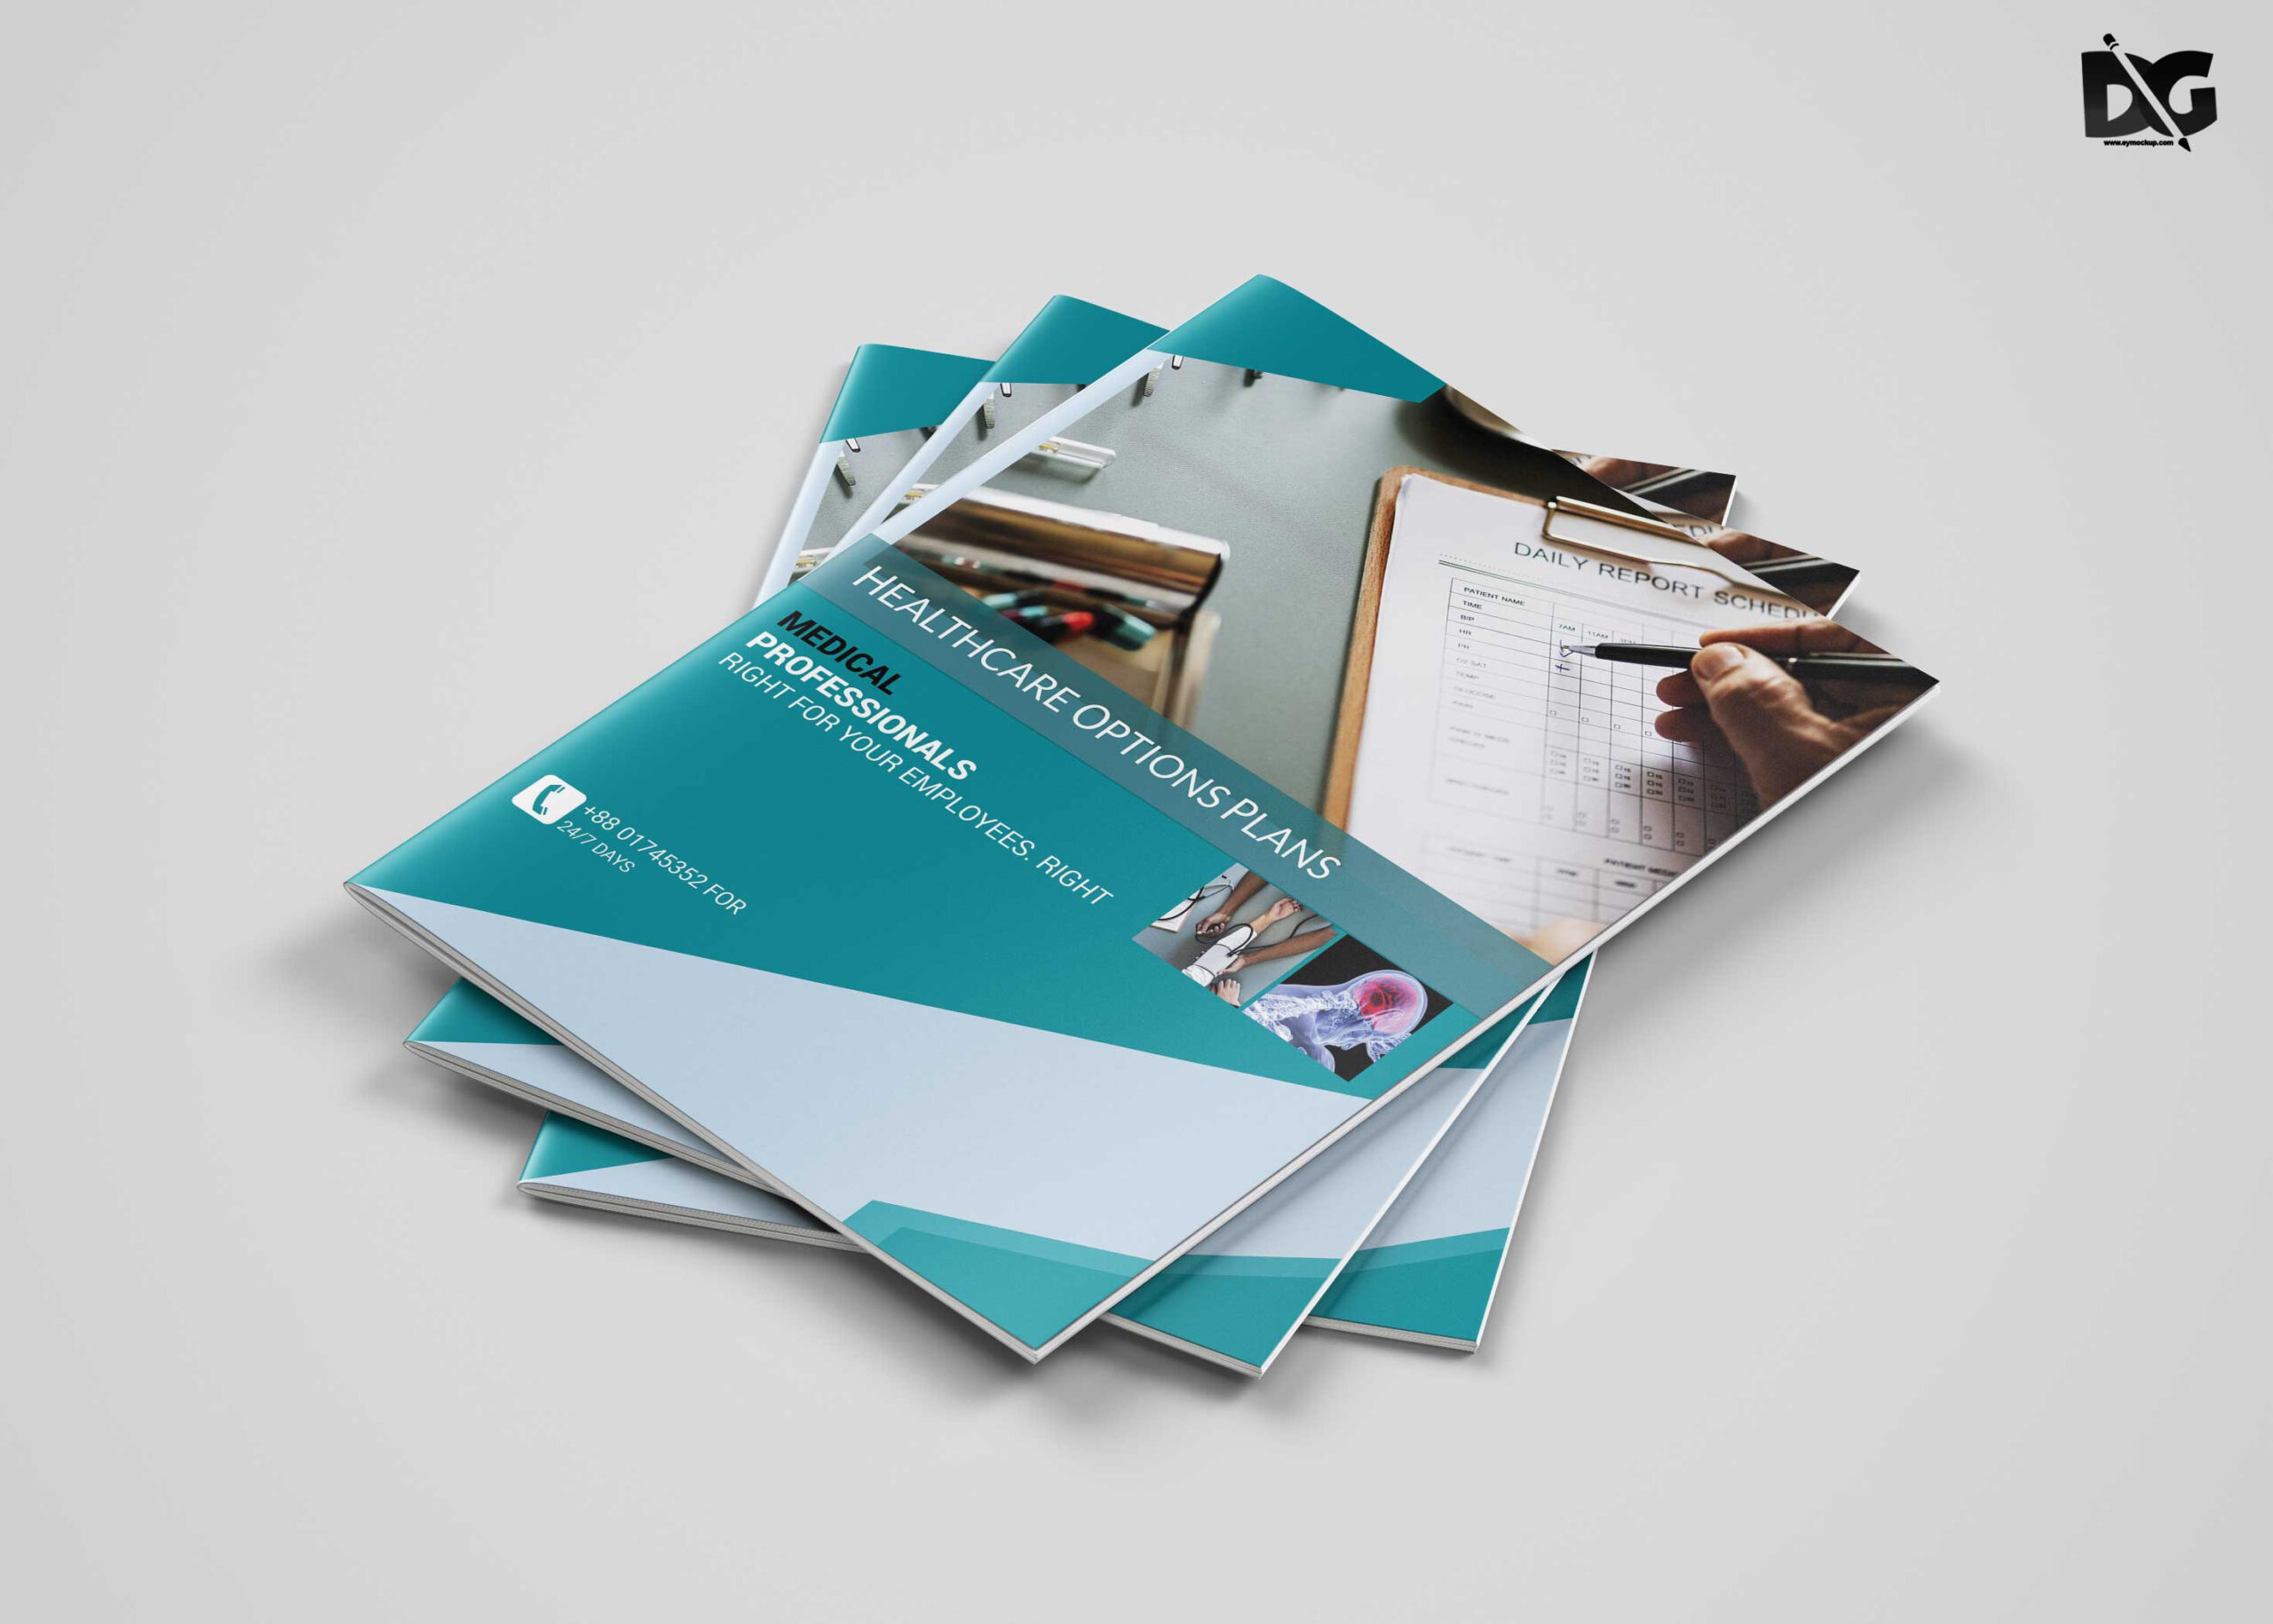 Free Download Health Care A4 Brochure Template | Free Psd Mockup Regarding Healthcare Brochure Templates Free Download